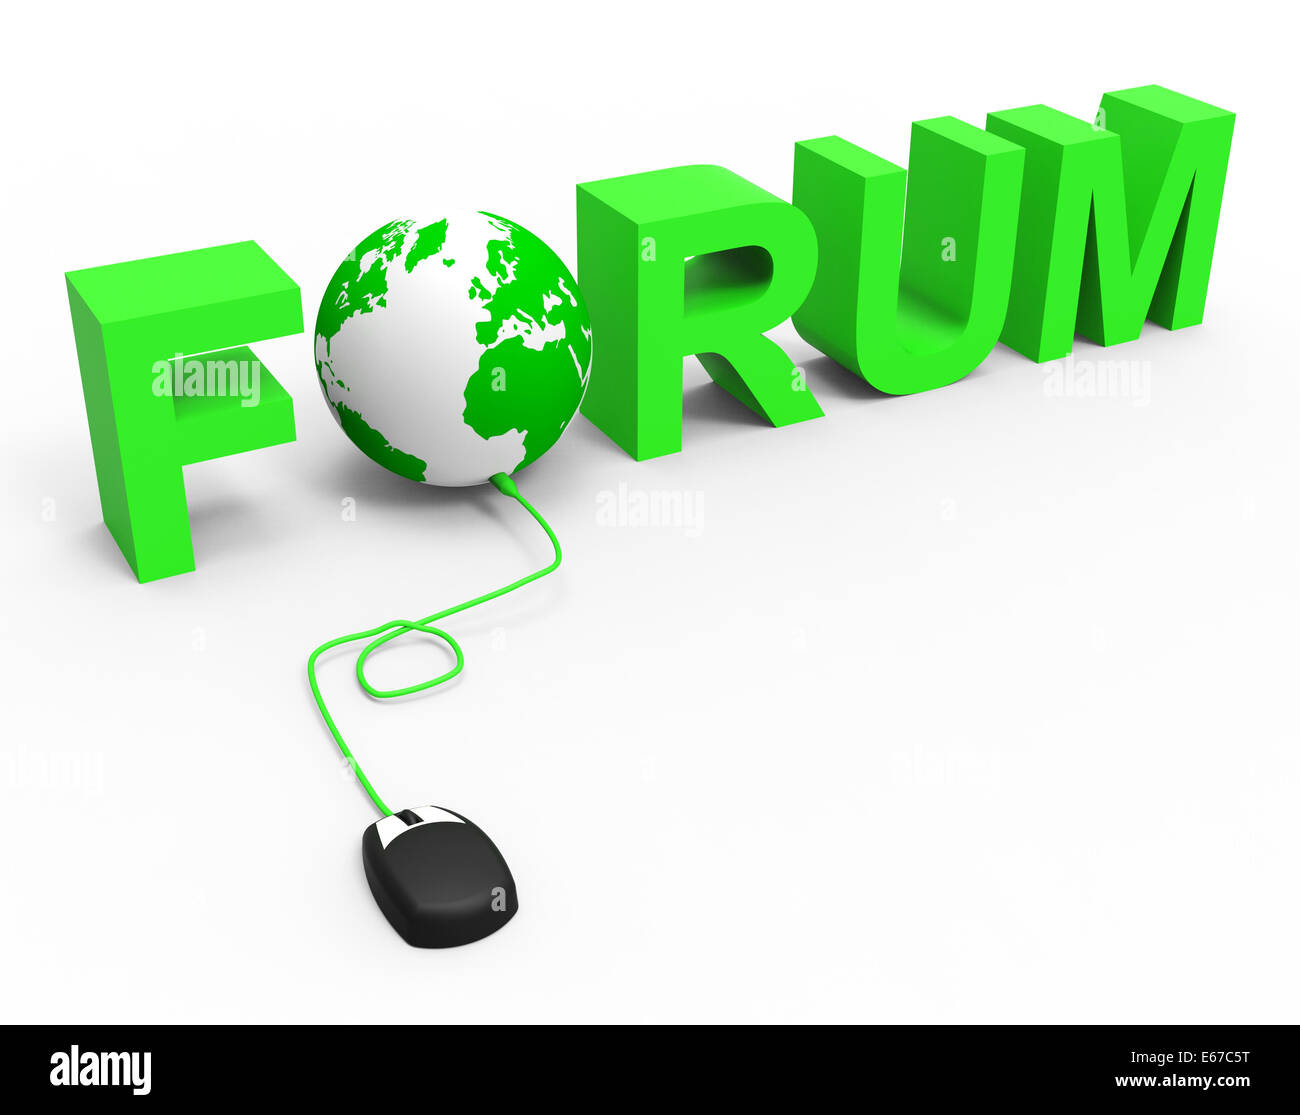 Internet Forum Meaning World Wide Web And Web Site Stock Photo